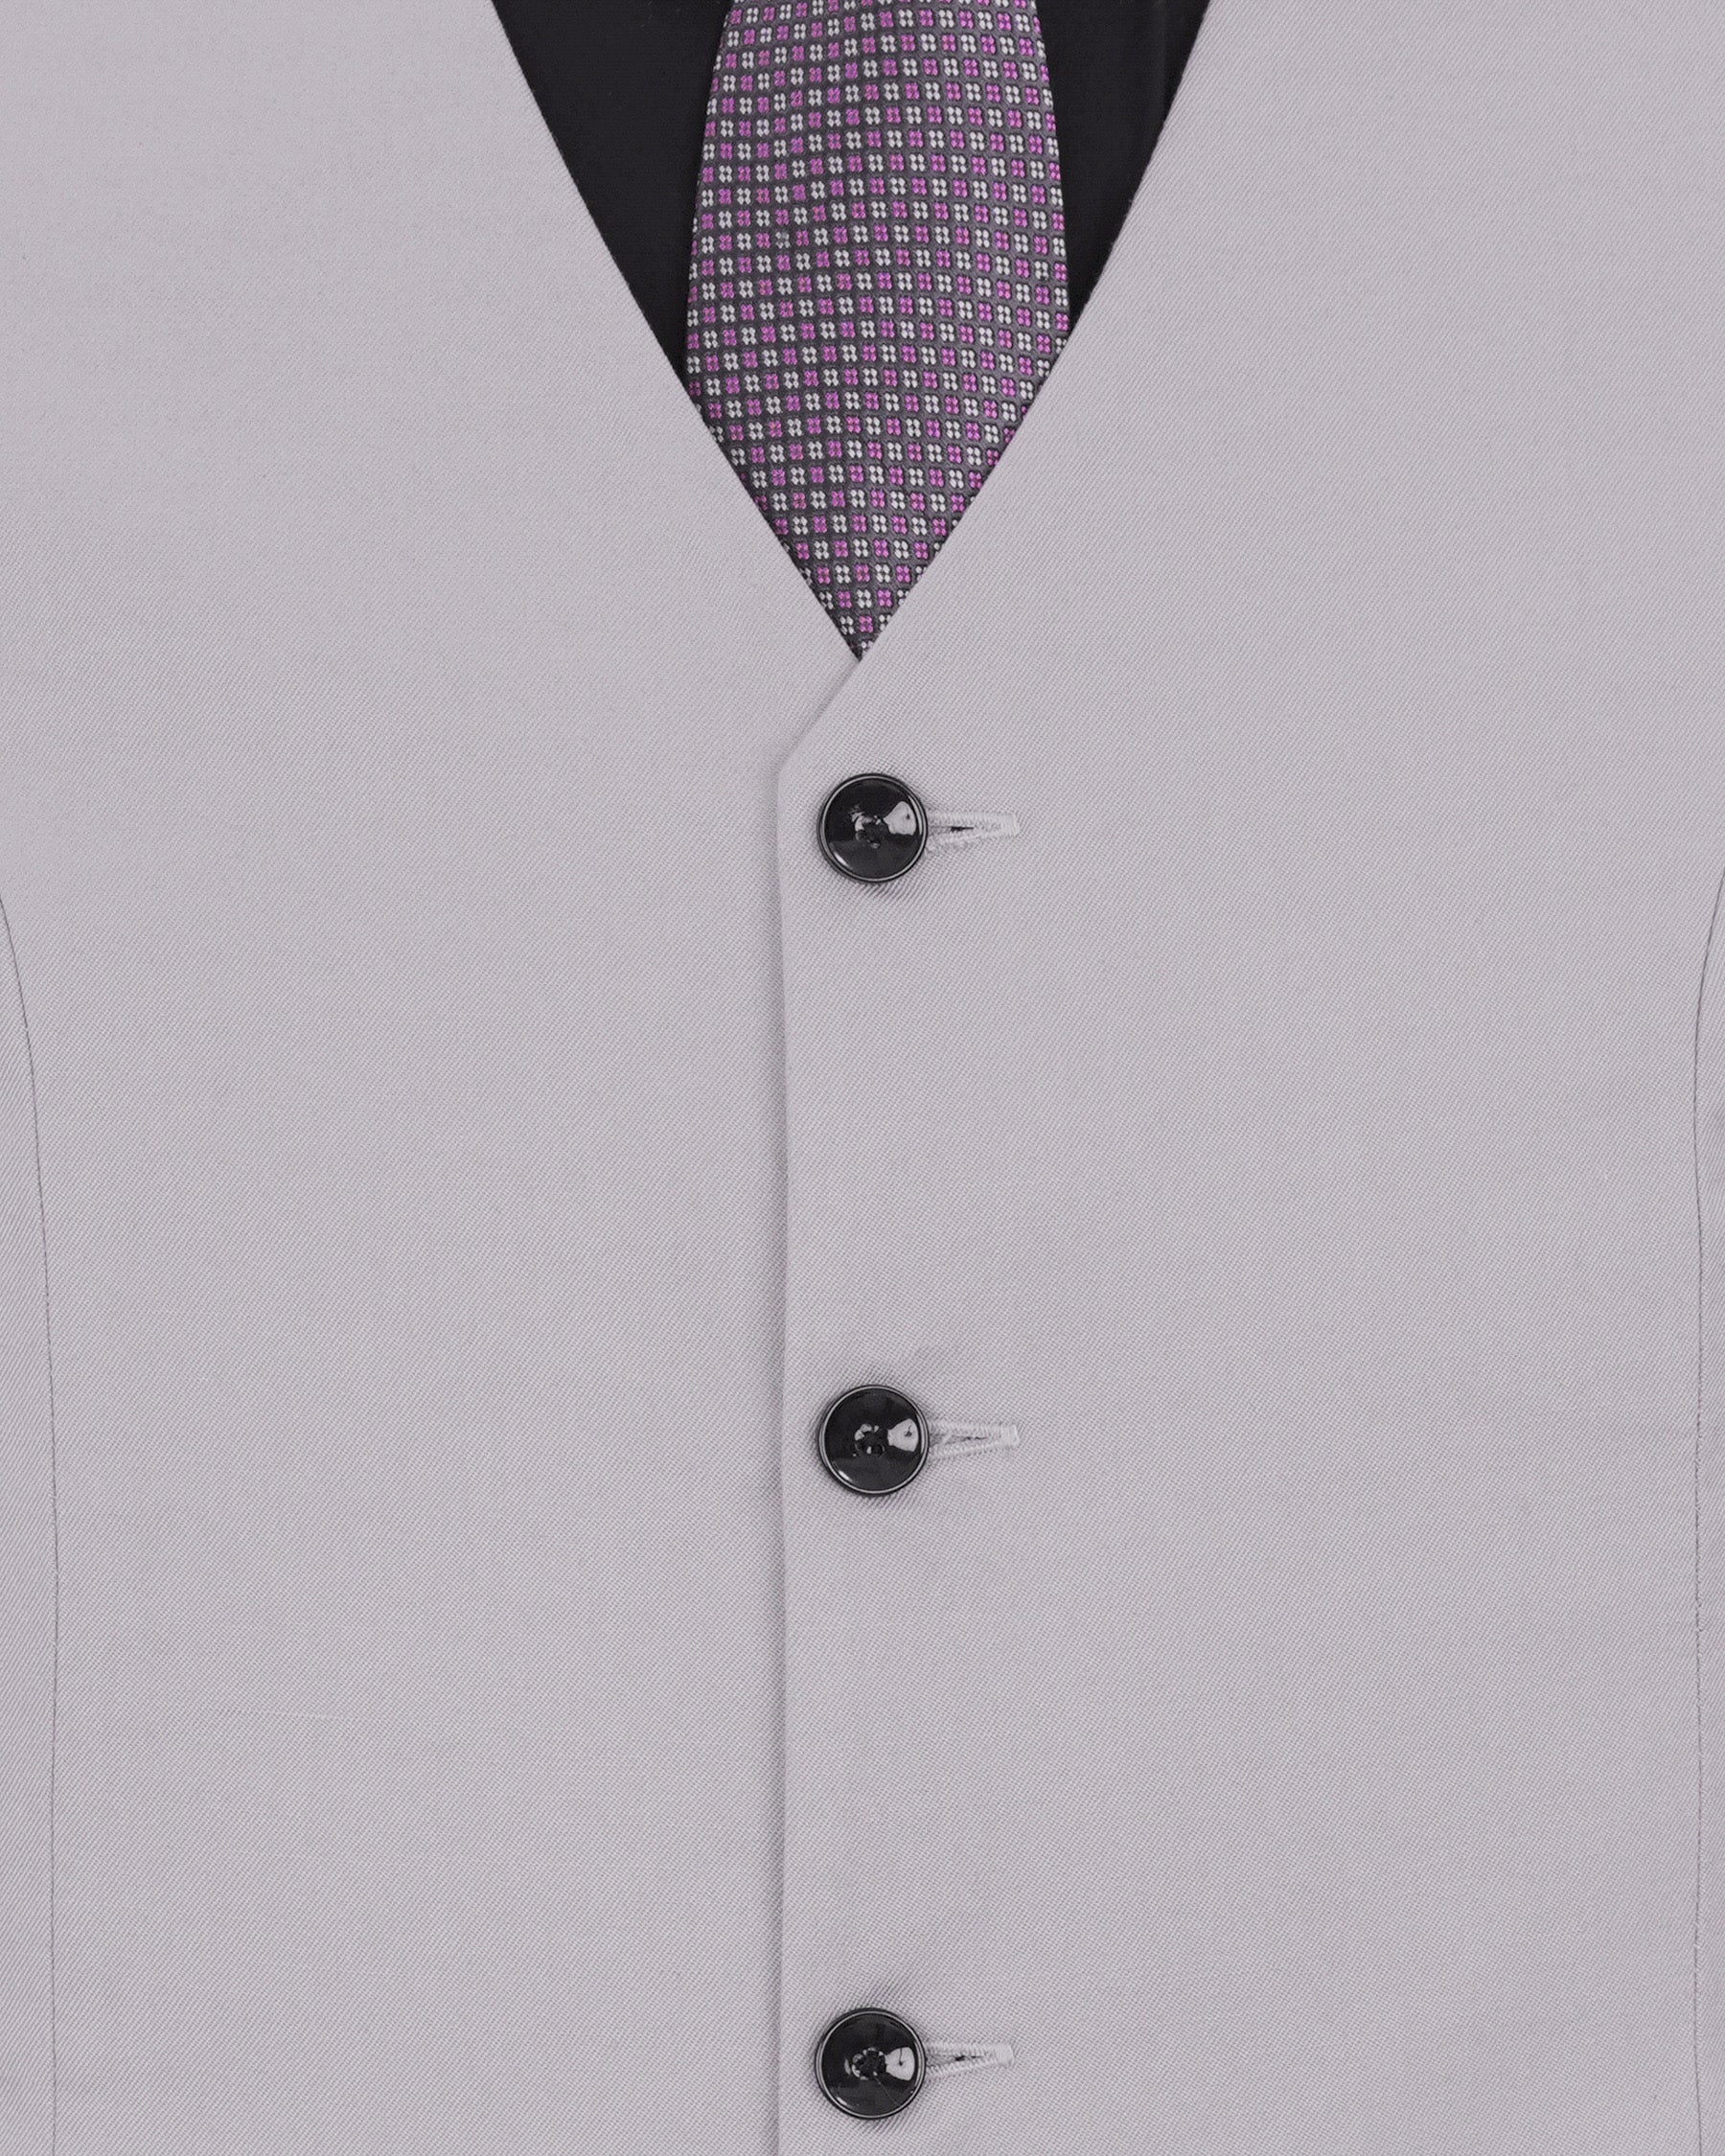 Amethyst Smoke Gray Double-Breasted Suit